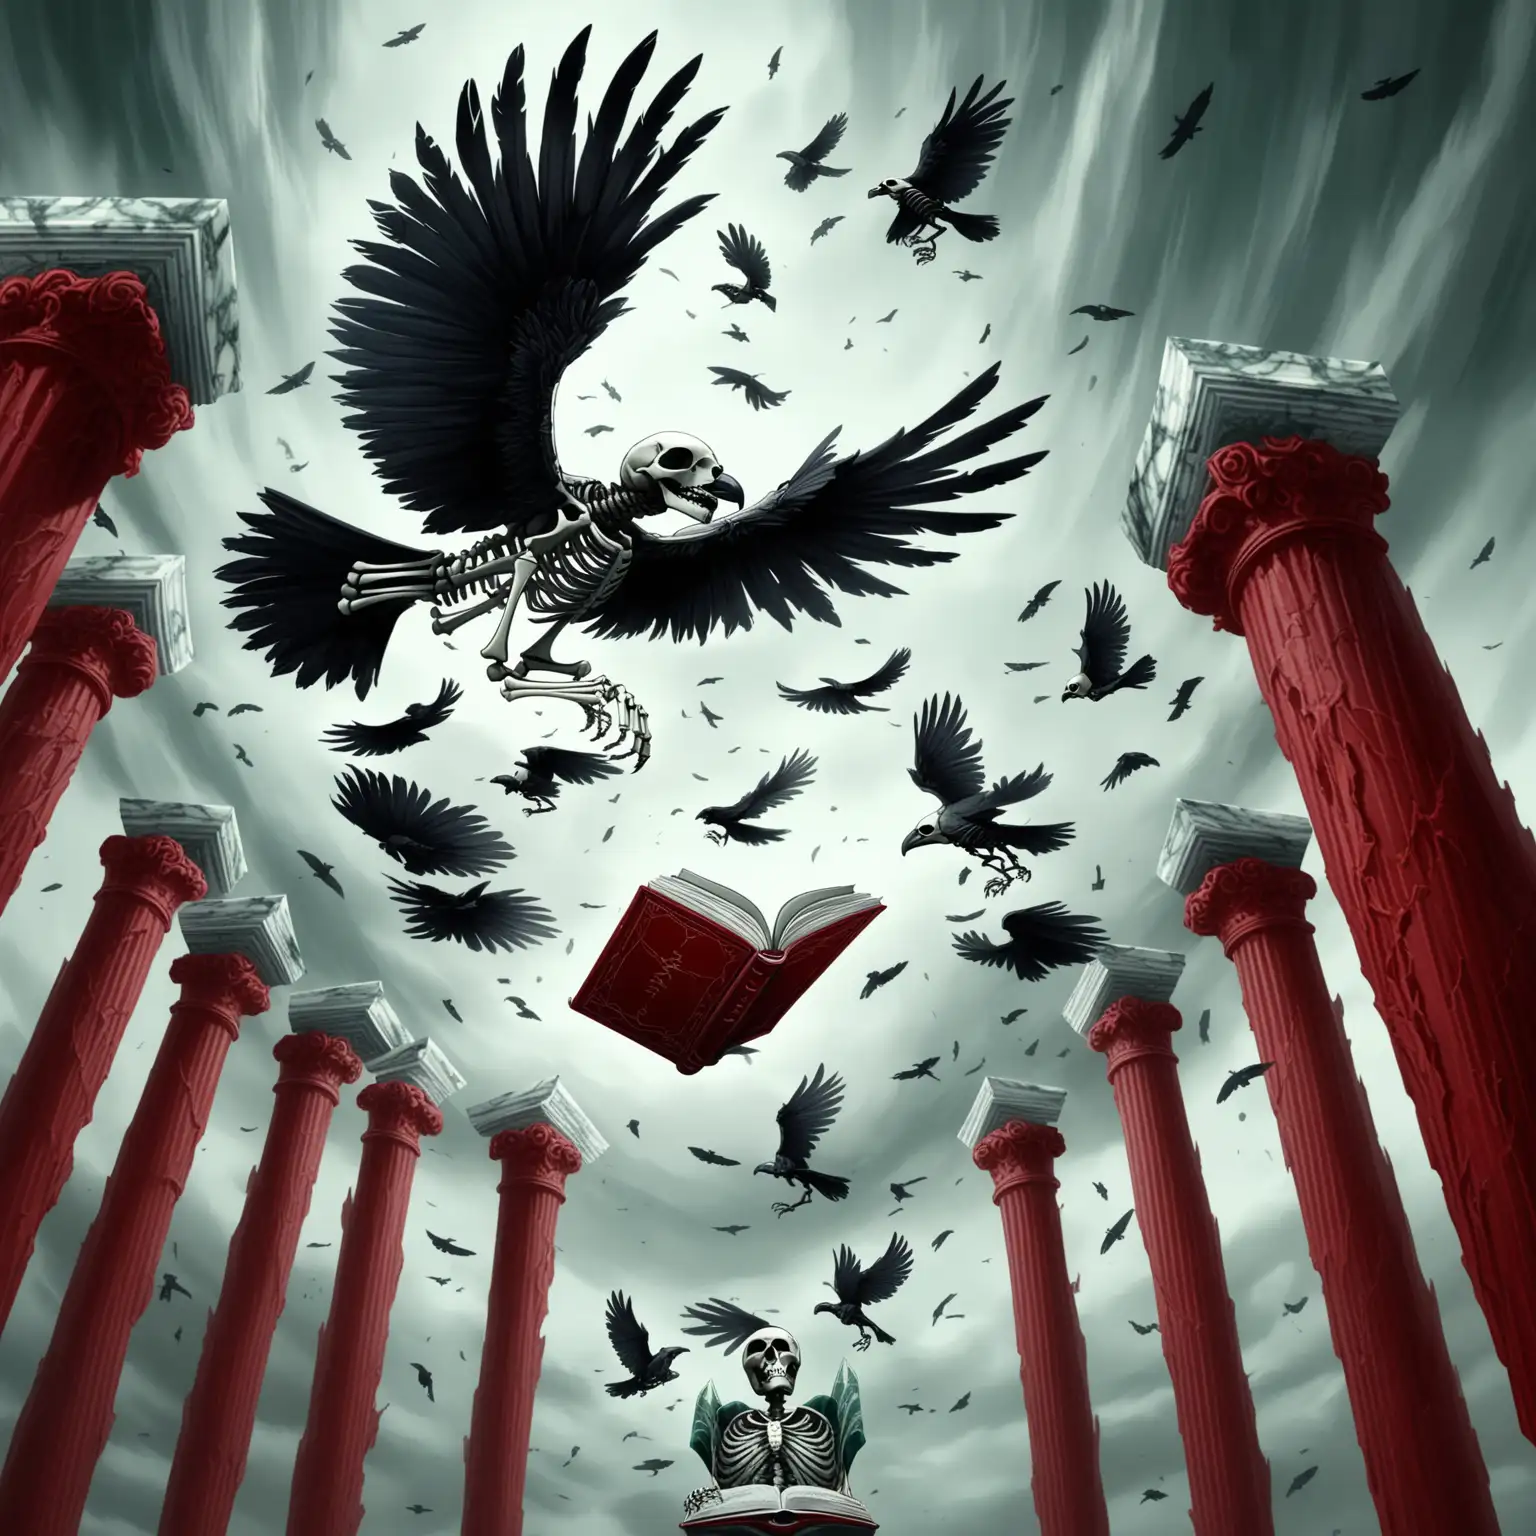 Raven Skeleton Flying Above Marble Pillars in Red and Green Ambience